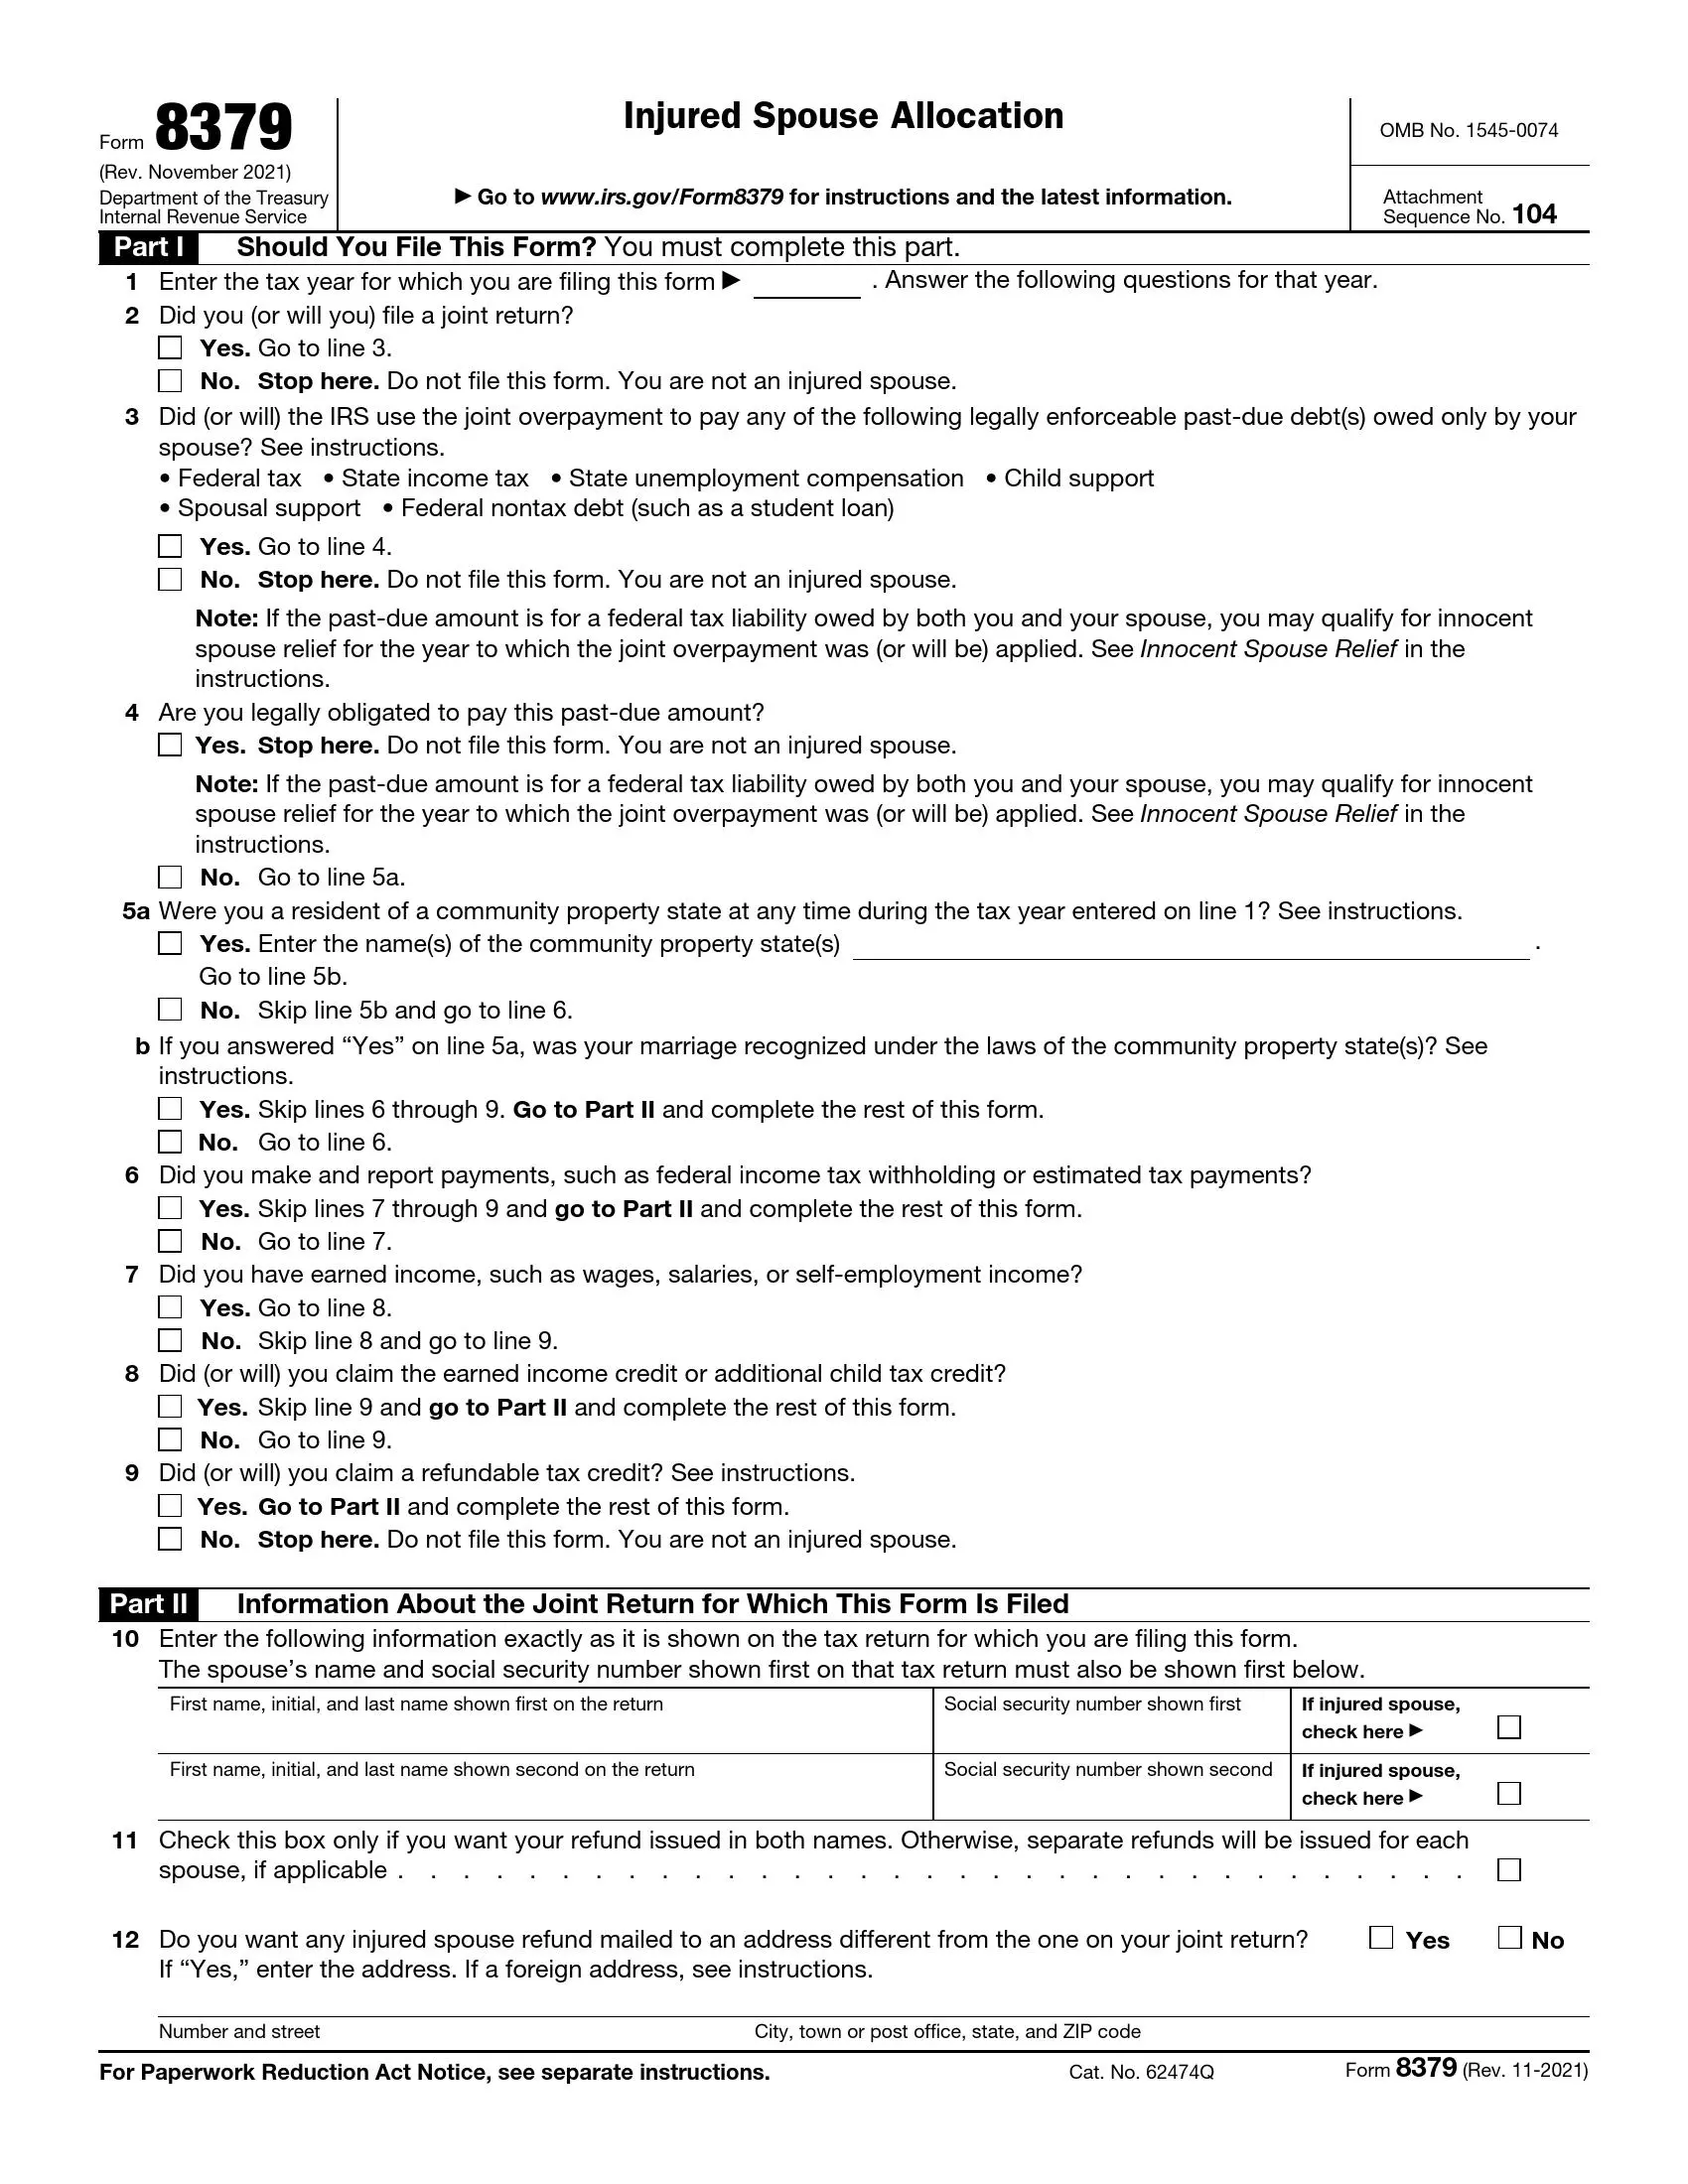 irs form 8379 rev 11 2021 preview